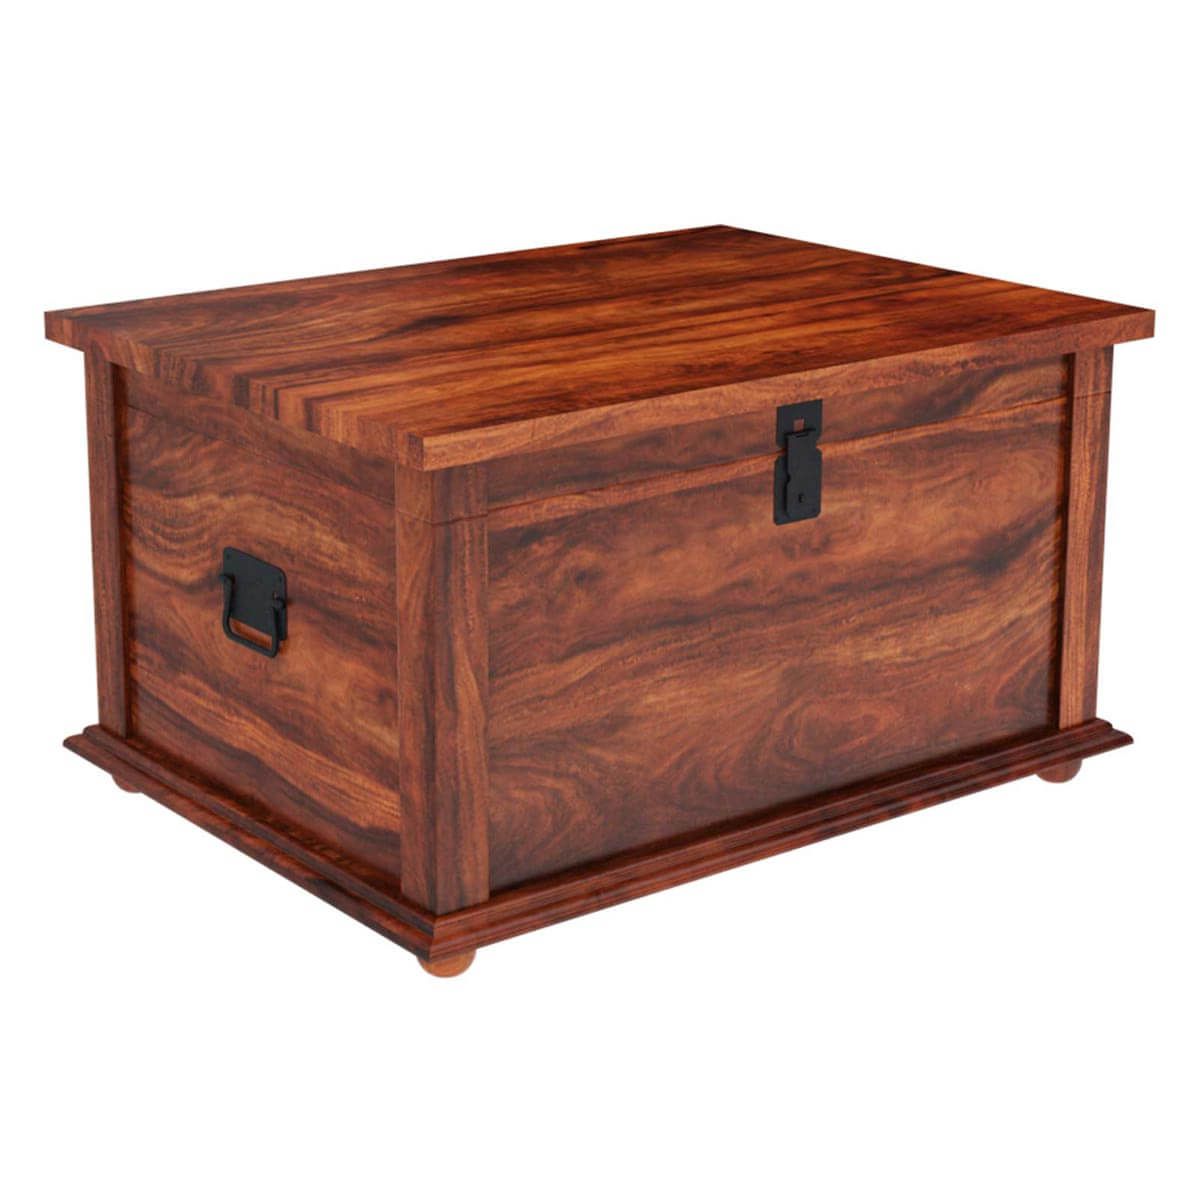 Rustic Primitive Solid Wood Storage Trunk Coffee Table New In Well Liked Espresso Wood Trunk Cocktail Tables (Gallery 6 of 20)